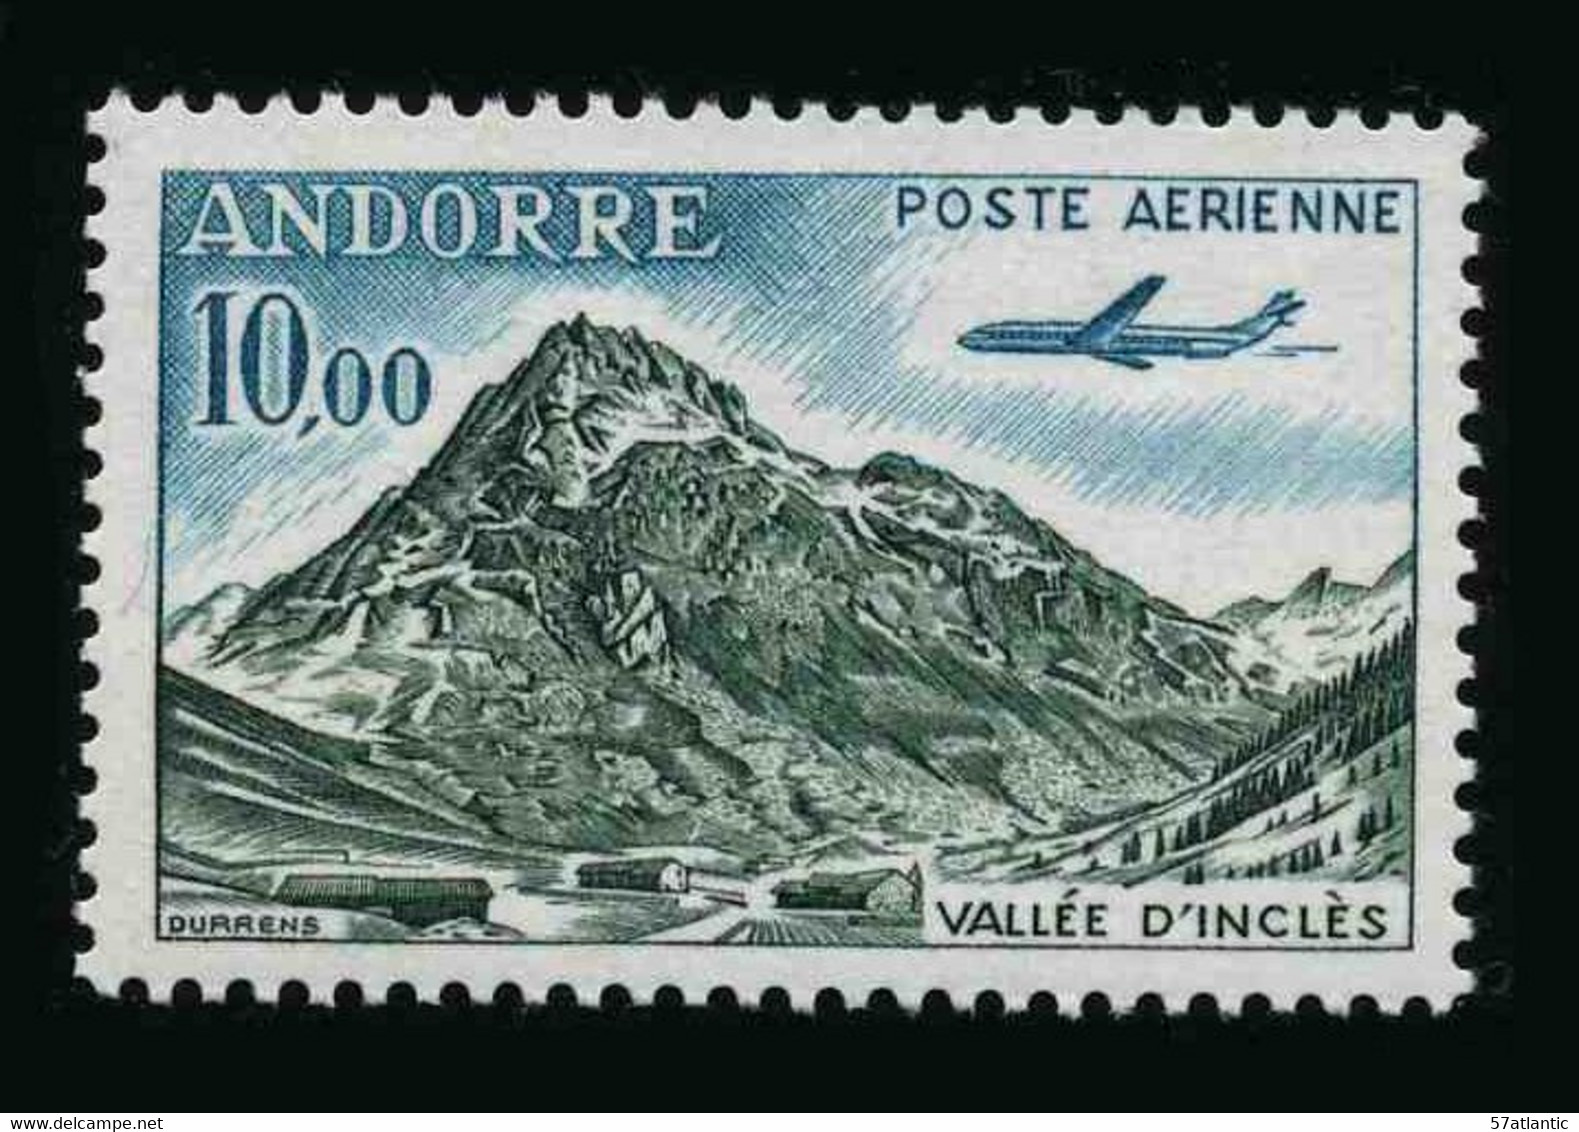 ANDORRE FRANCAIS - YT PA 8 ** - TIMBRE NEUF ** - Airmail